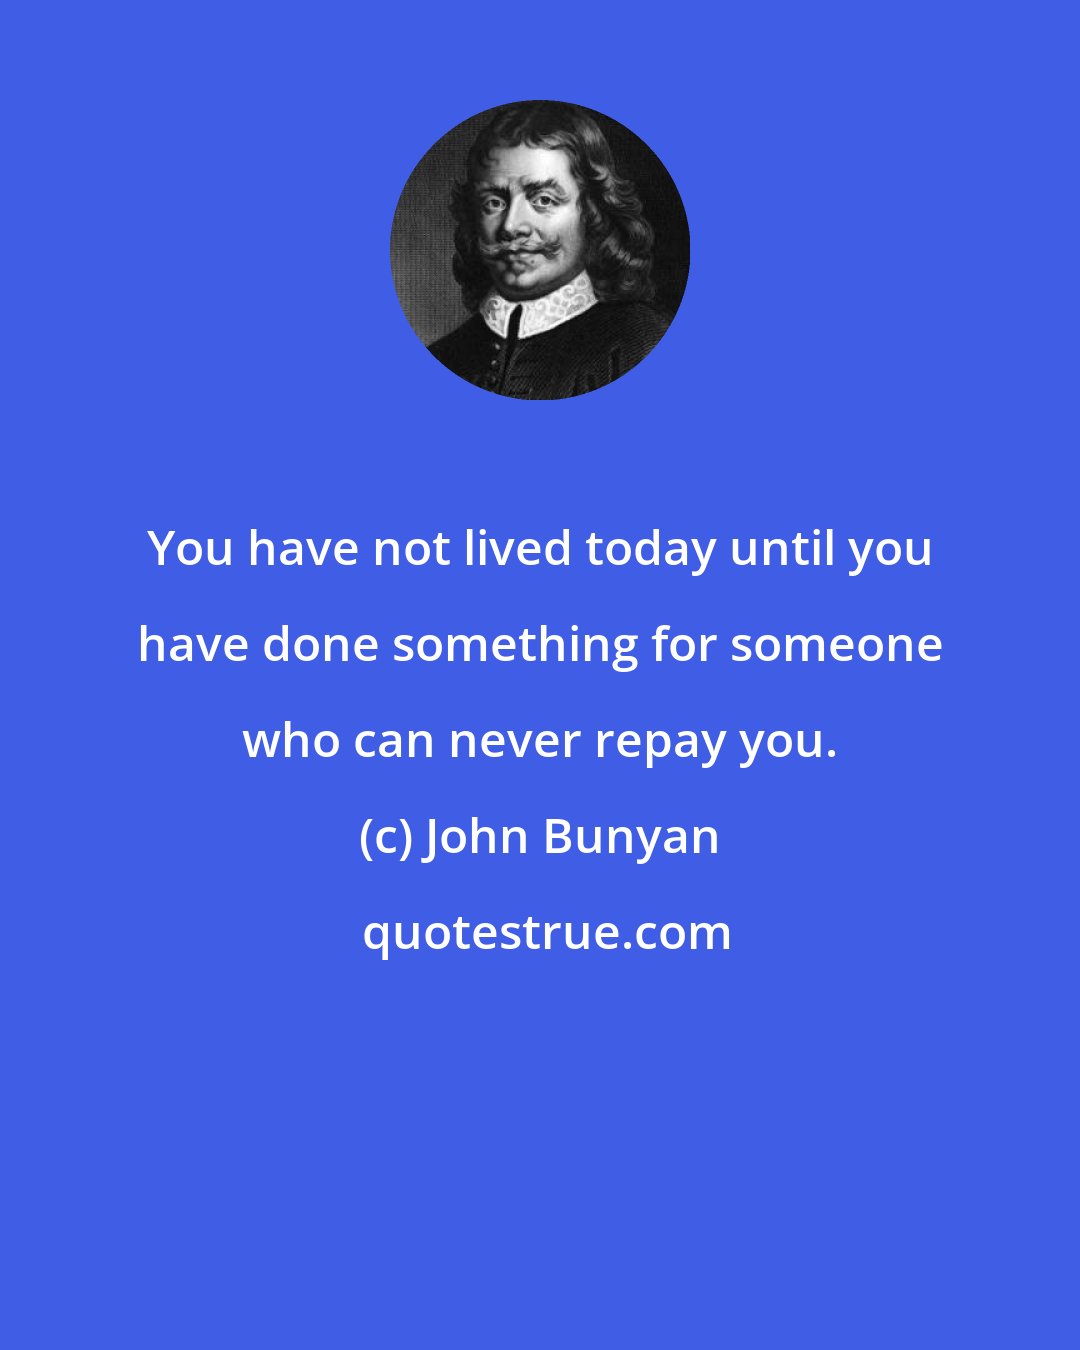 John Bunyan: You have not lived today until you have done something for someone who can never repay you.